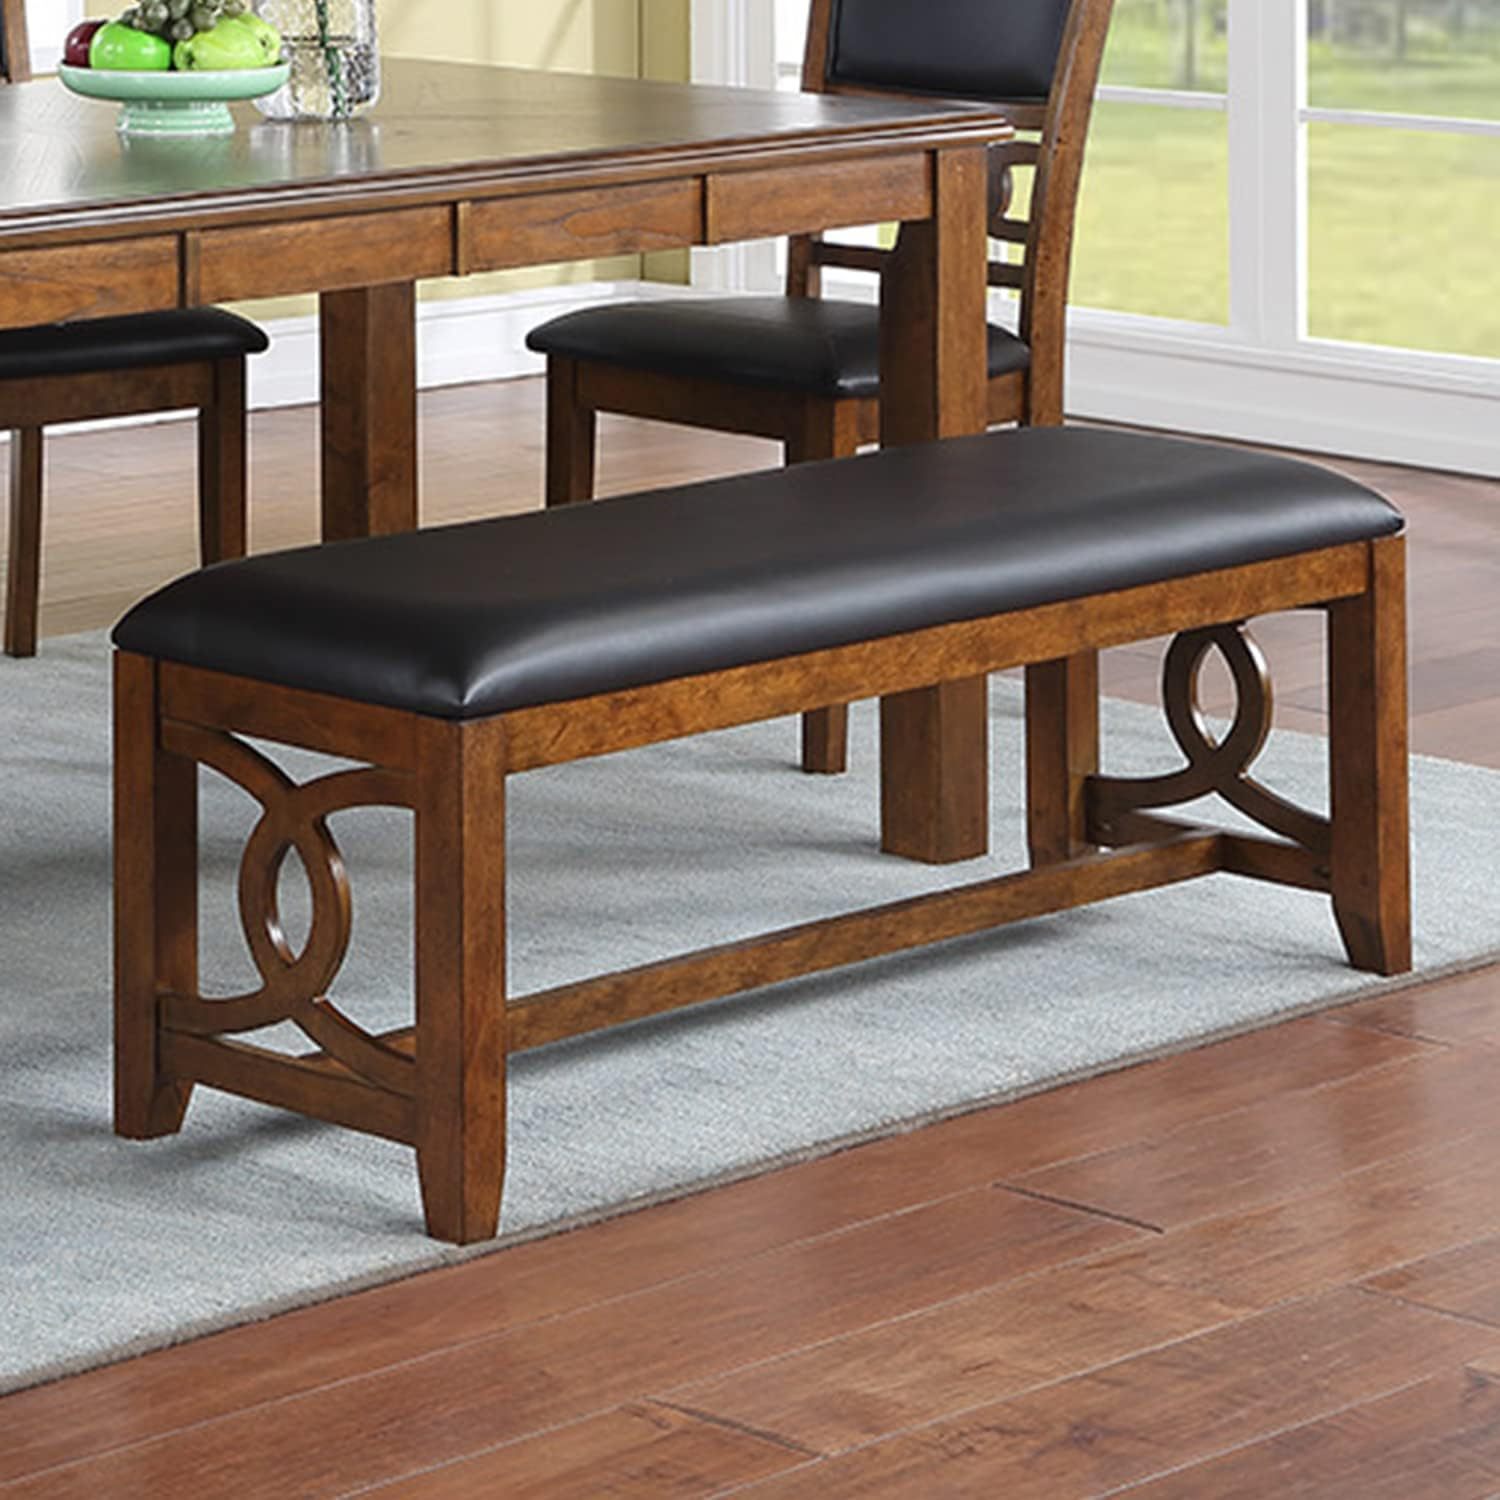 Contemporary Dining 6pc Set Table w 4x Side Chairs And brown-wood-dining room-bench